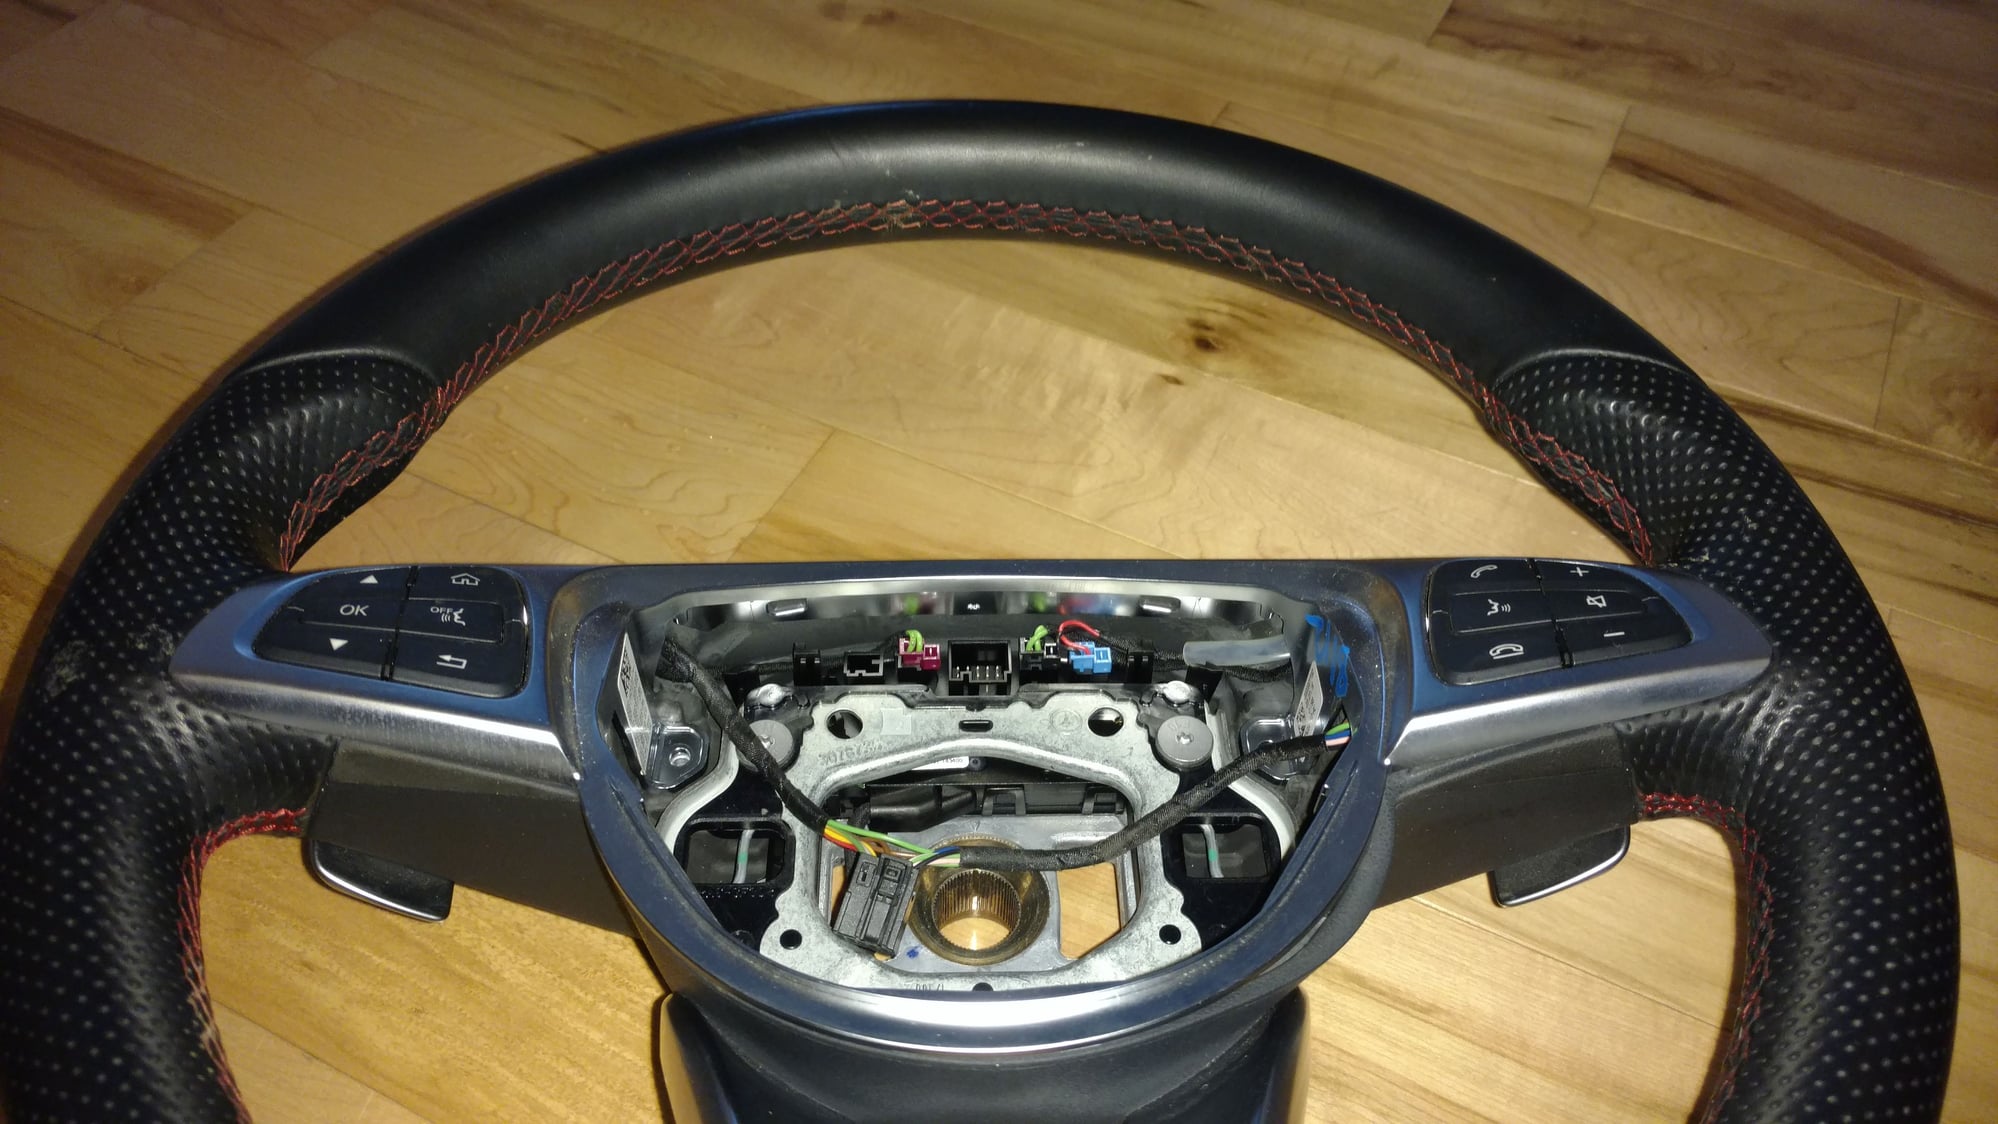 Interior/Upholstery - Mercedes Benz C Class  2016 450 AMG Steering Wheel - Used - All Years Mercedes-Benz C450 AMG - Wallington, NJ 07057, United States